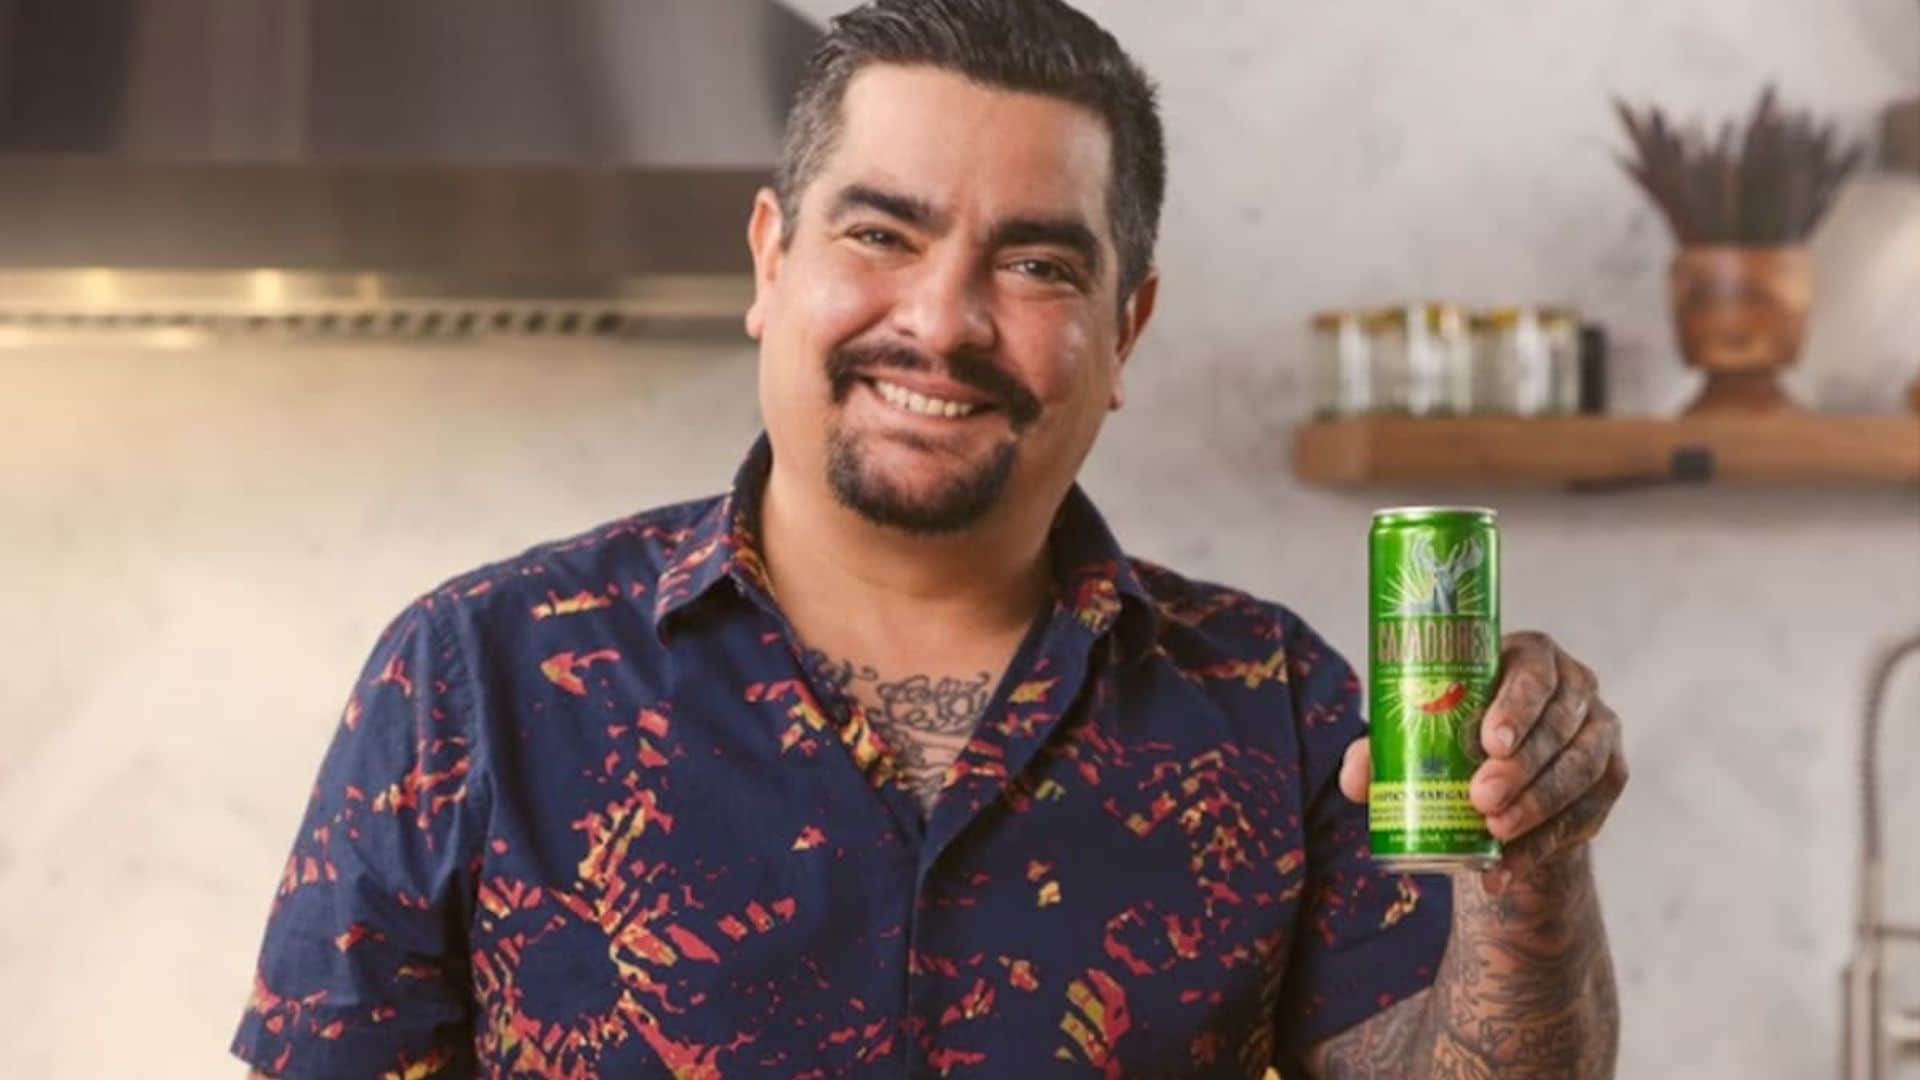 Chef Aarón Sánchez shares the perfect recipes for celebrating National Margarita Day